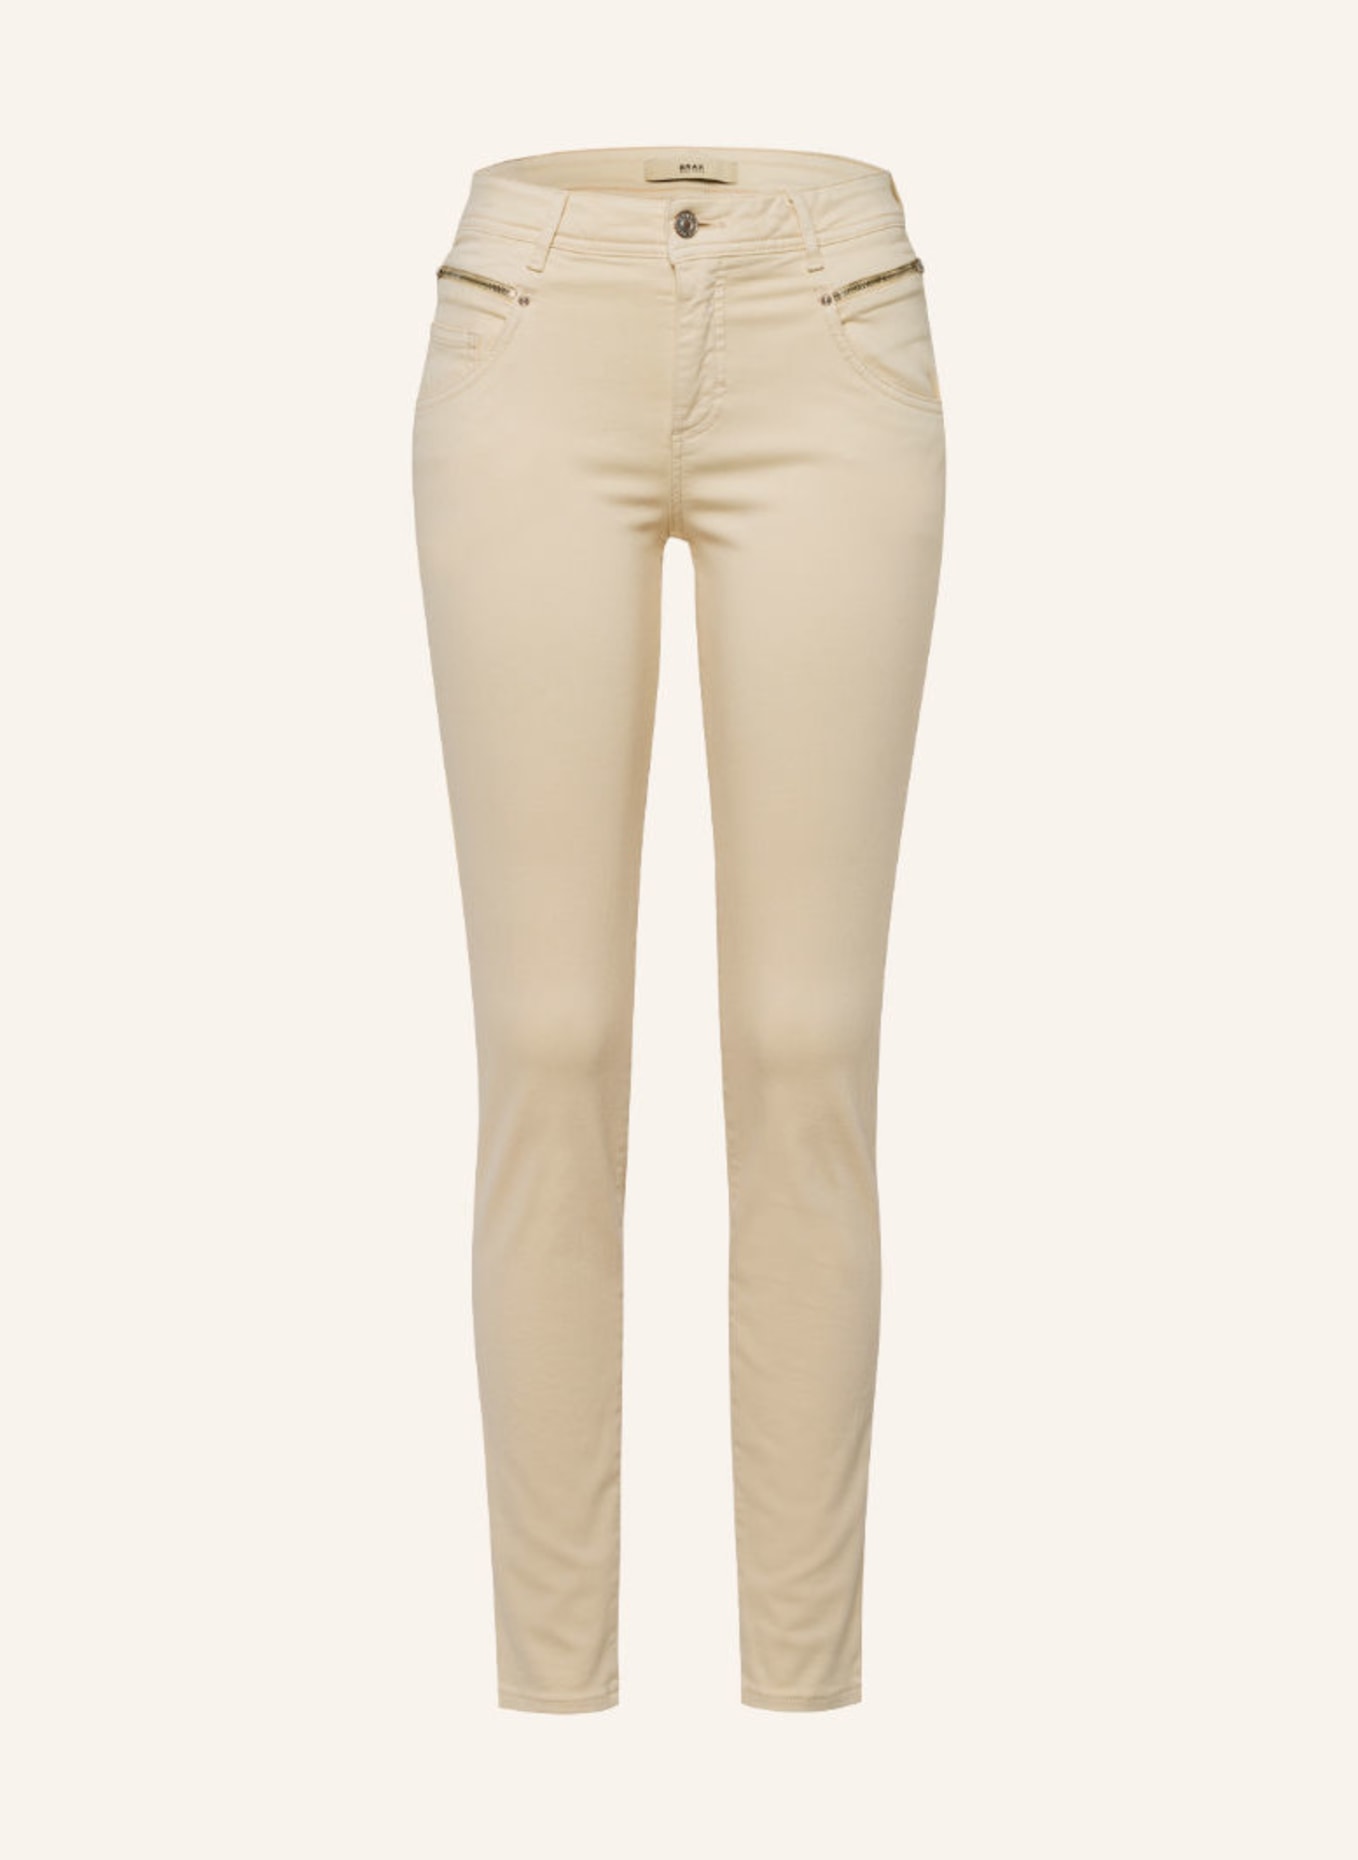 STYLE SHAKIRA Jeans BRAX in creme